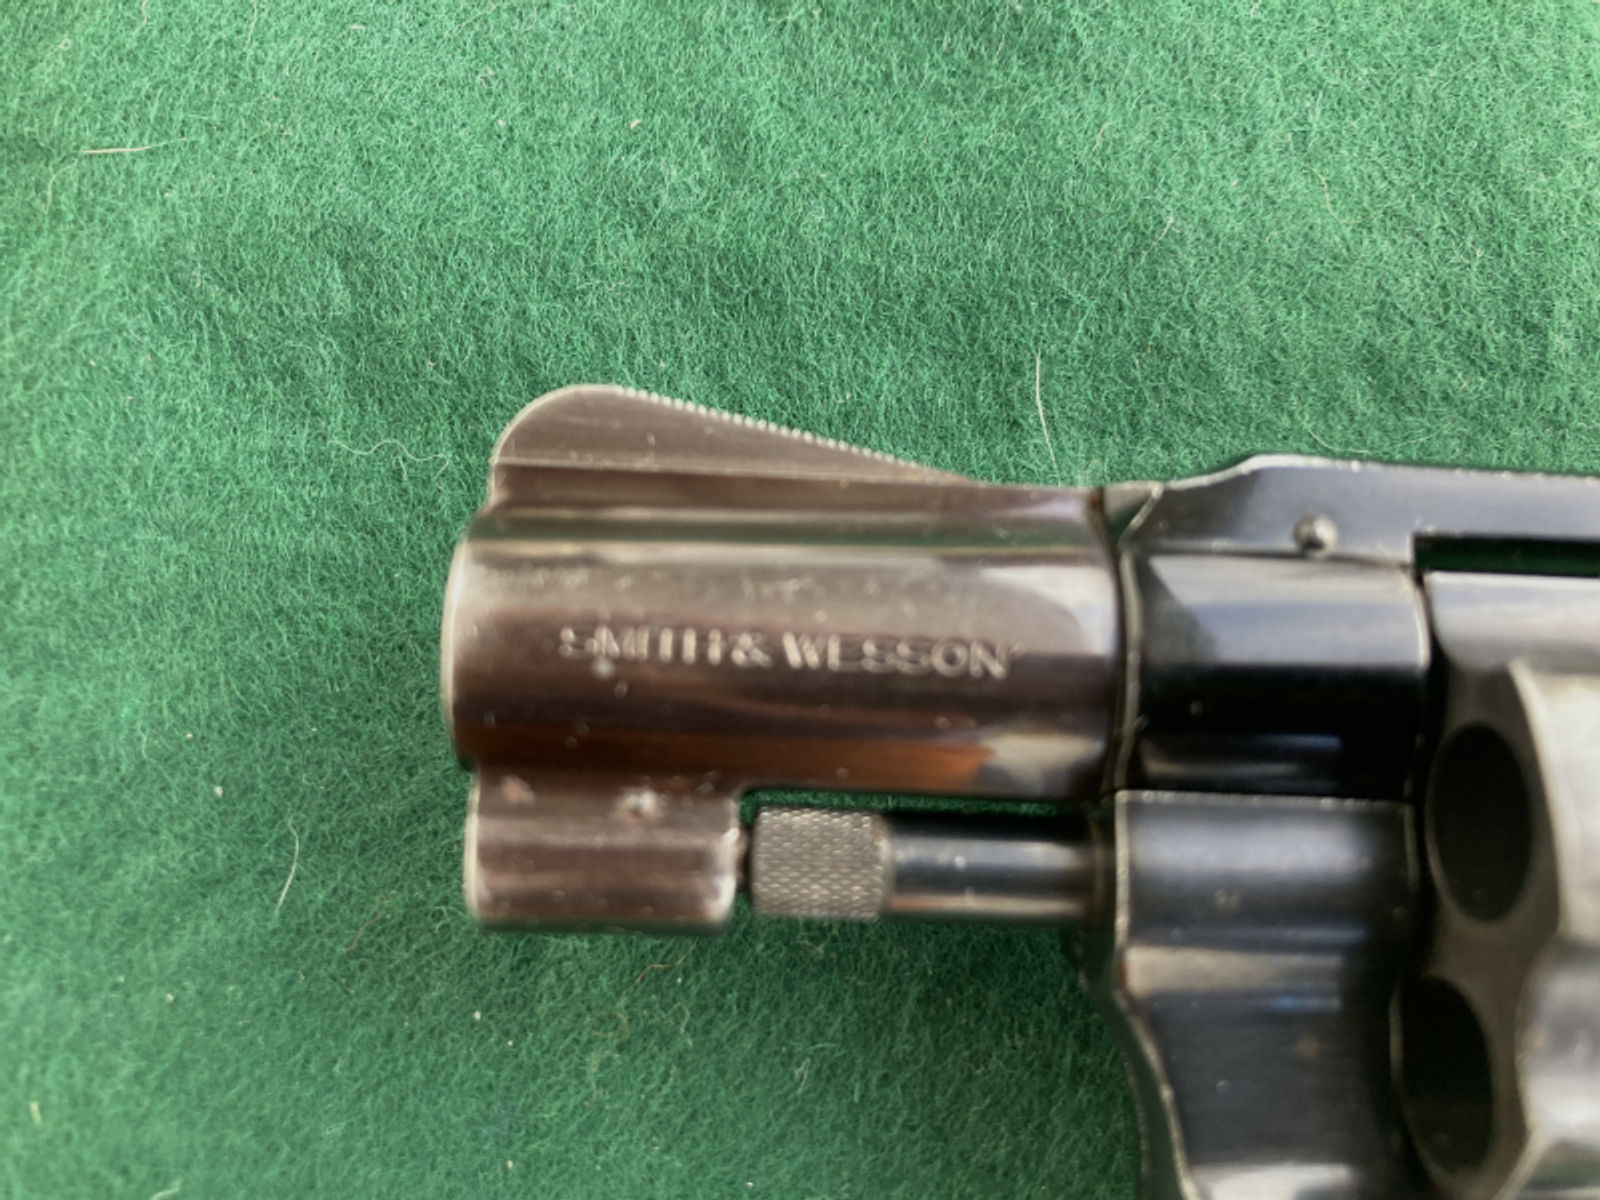 Smith & Wesson Revolver 38 SPEZIAL CTG Model 38 AIRWEIGHT